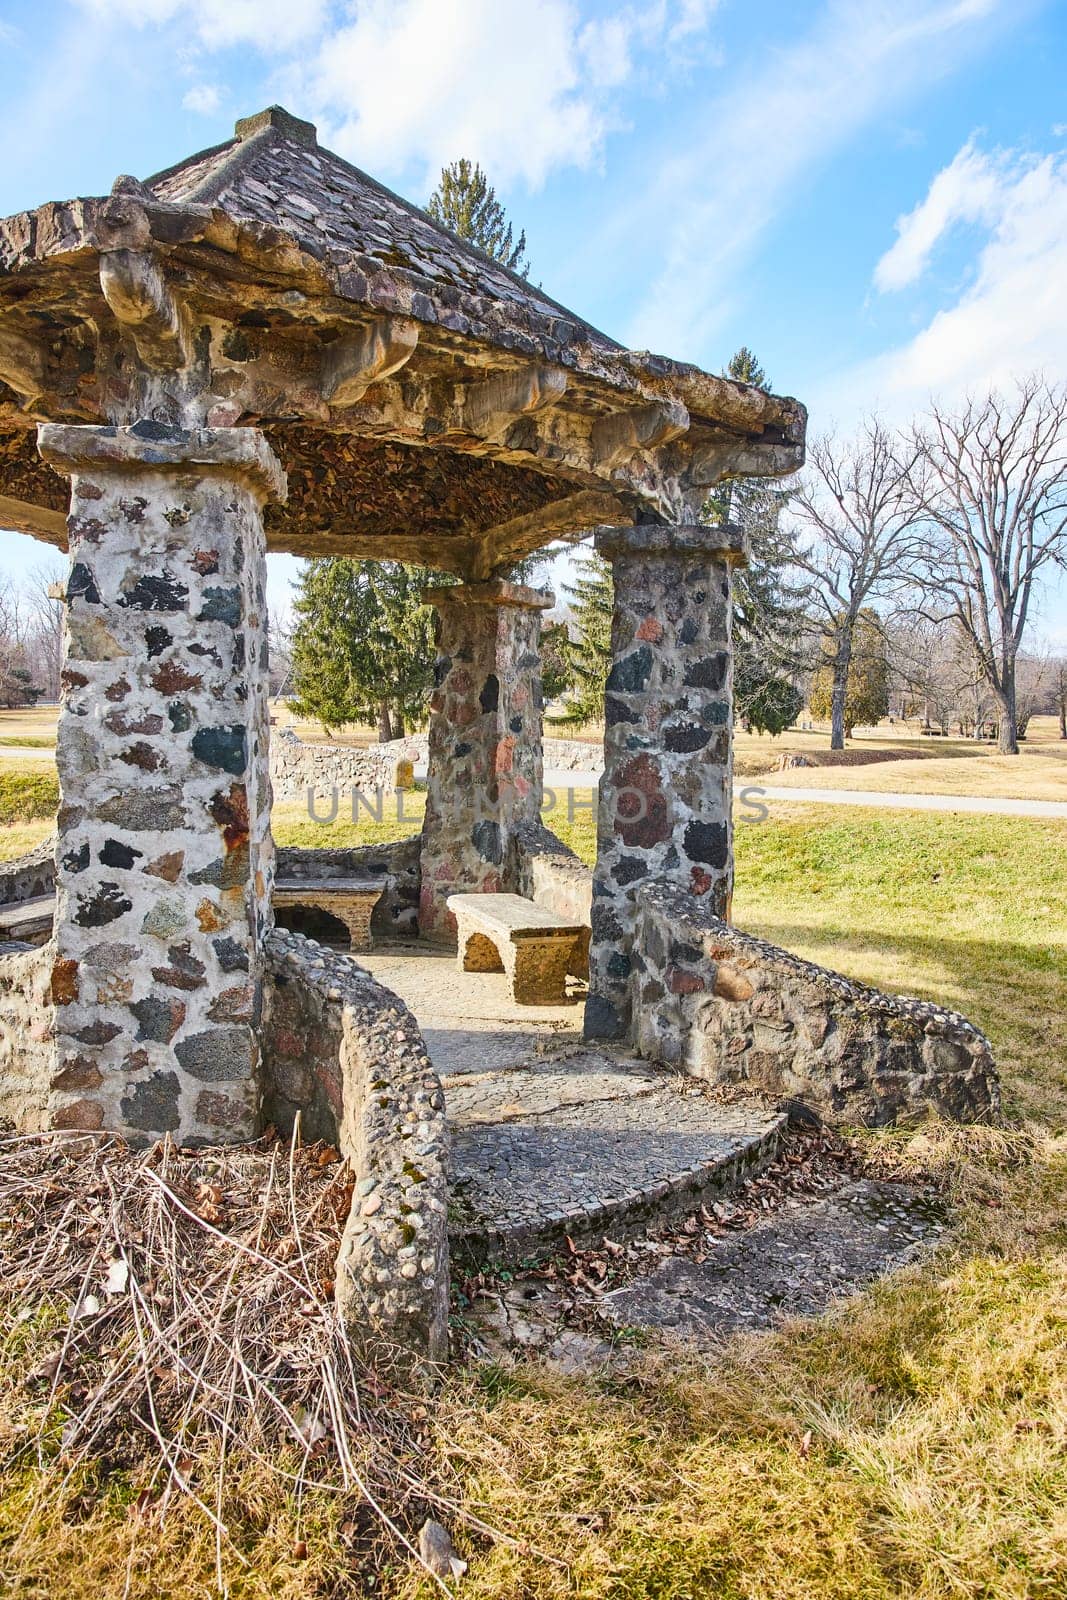 Rustic stone gazebo in tranquil Lindenwood Cemetery, Fort Wayne, Indiana - a serene winter retreat for reflection and history